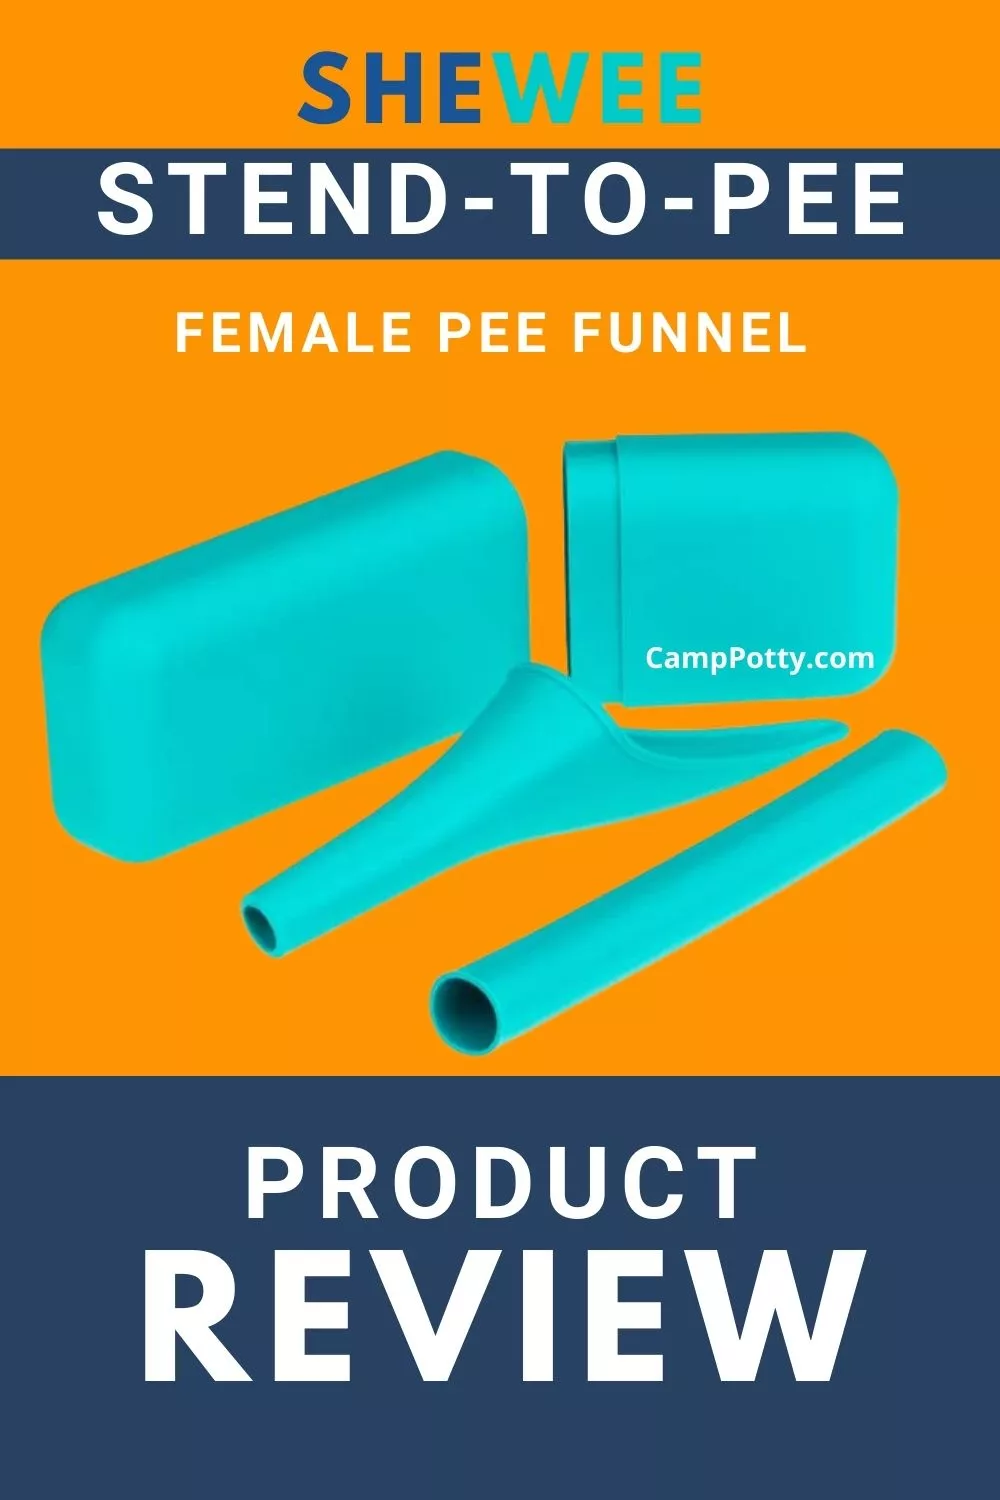 SHEWEE Stand to pee Female Urination Device review